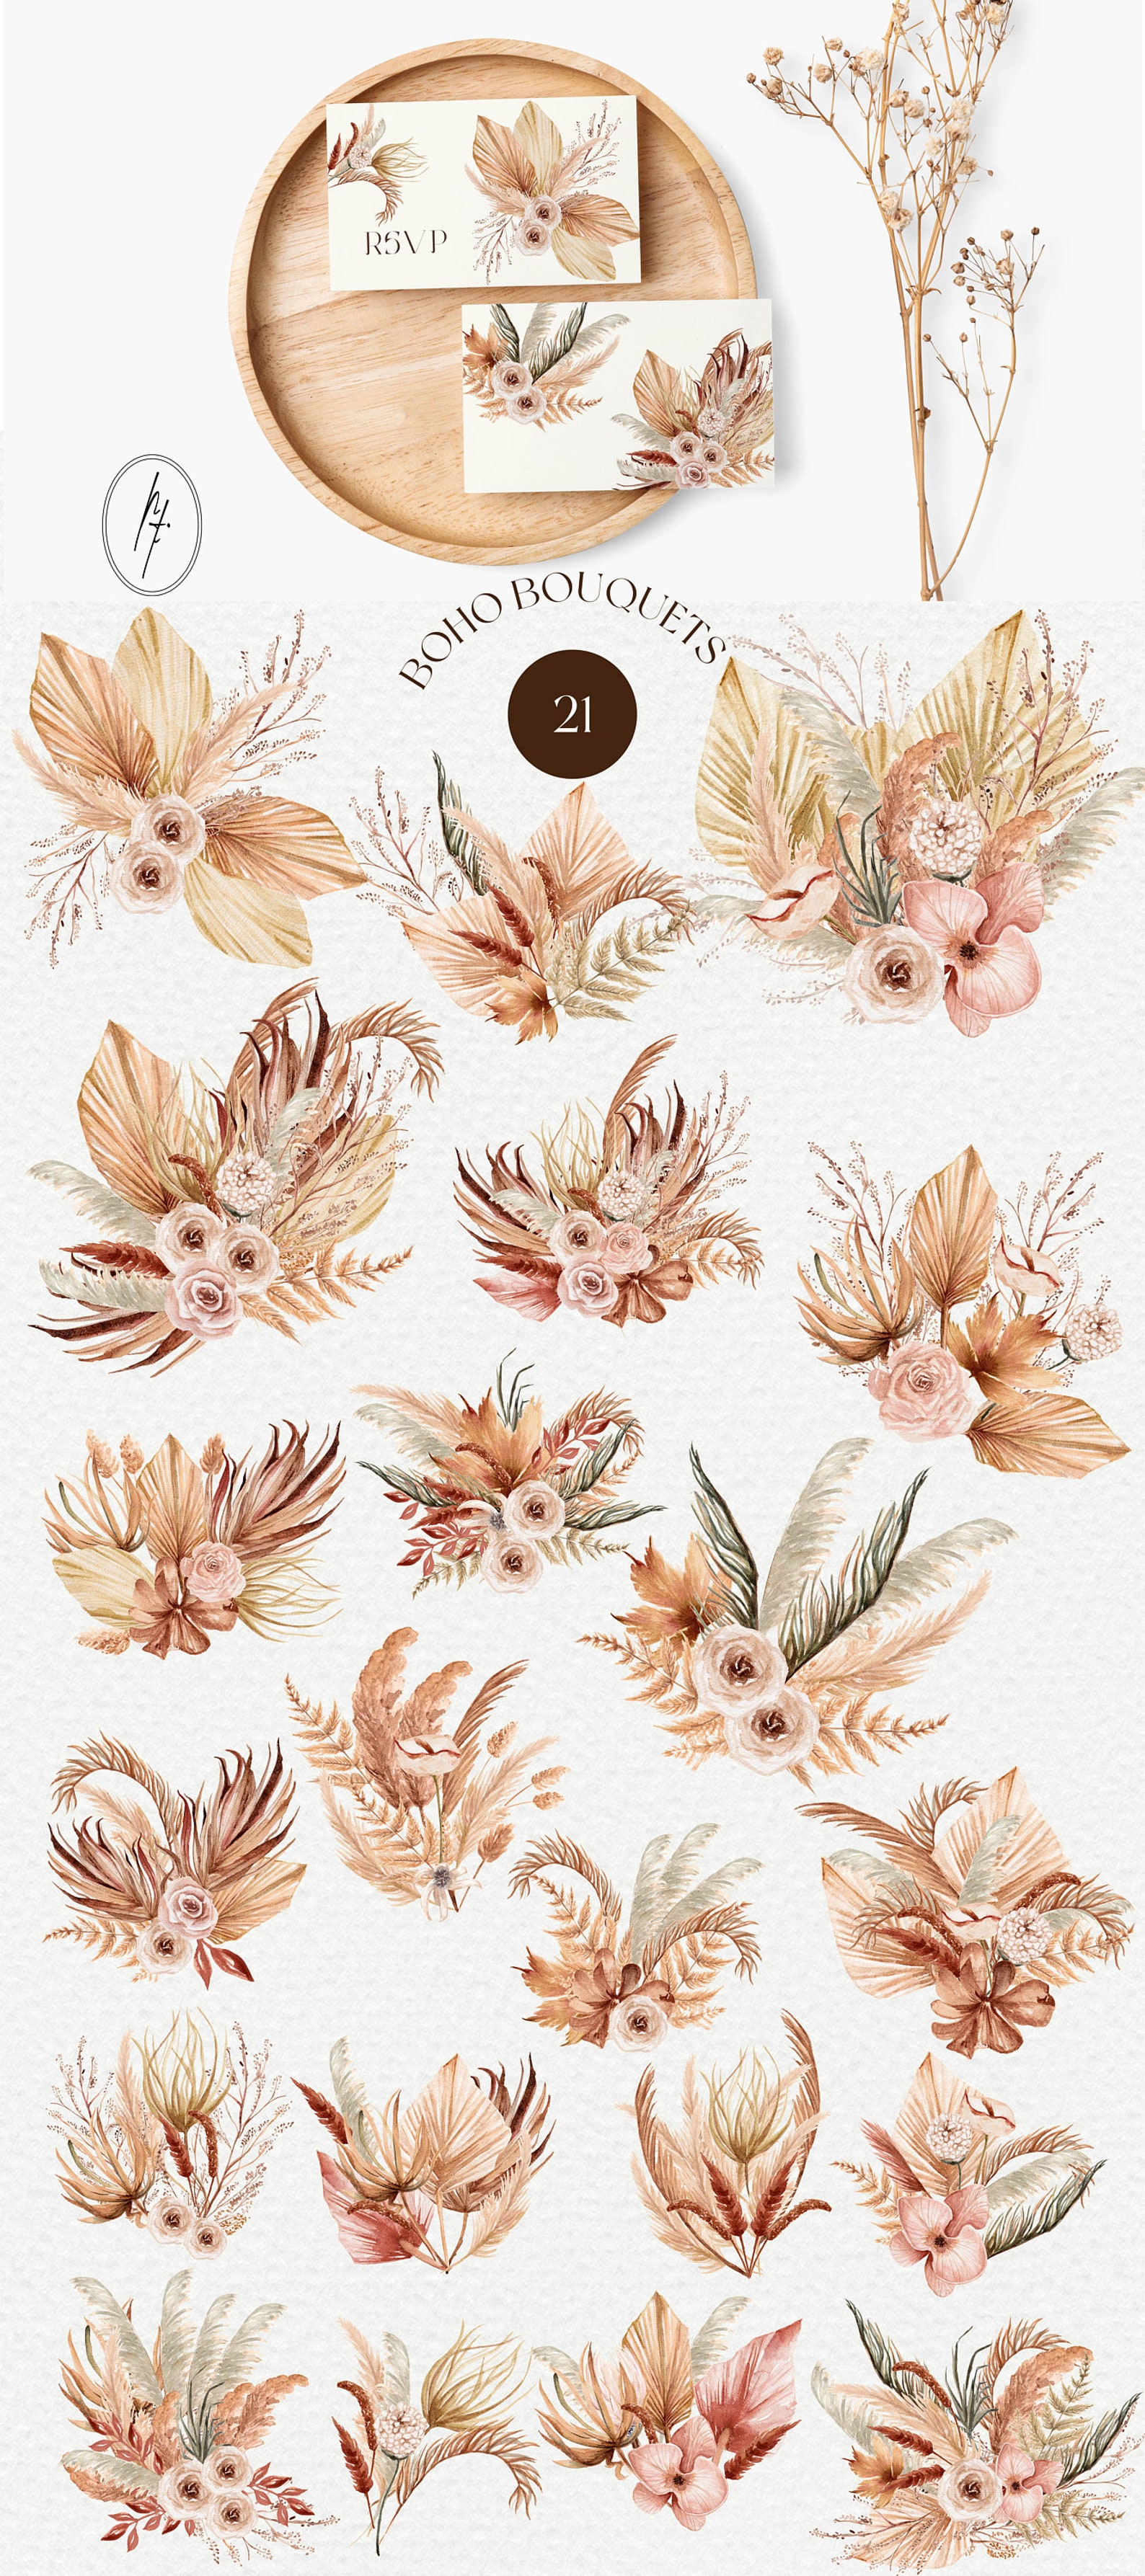 Boho Floral Clipart Boho Floral Pampas Dried Flowers - Etsy